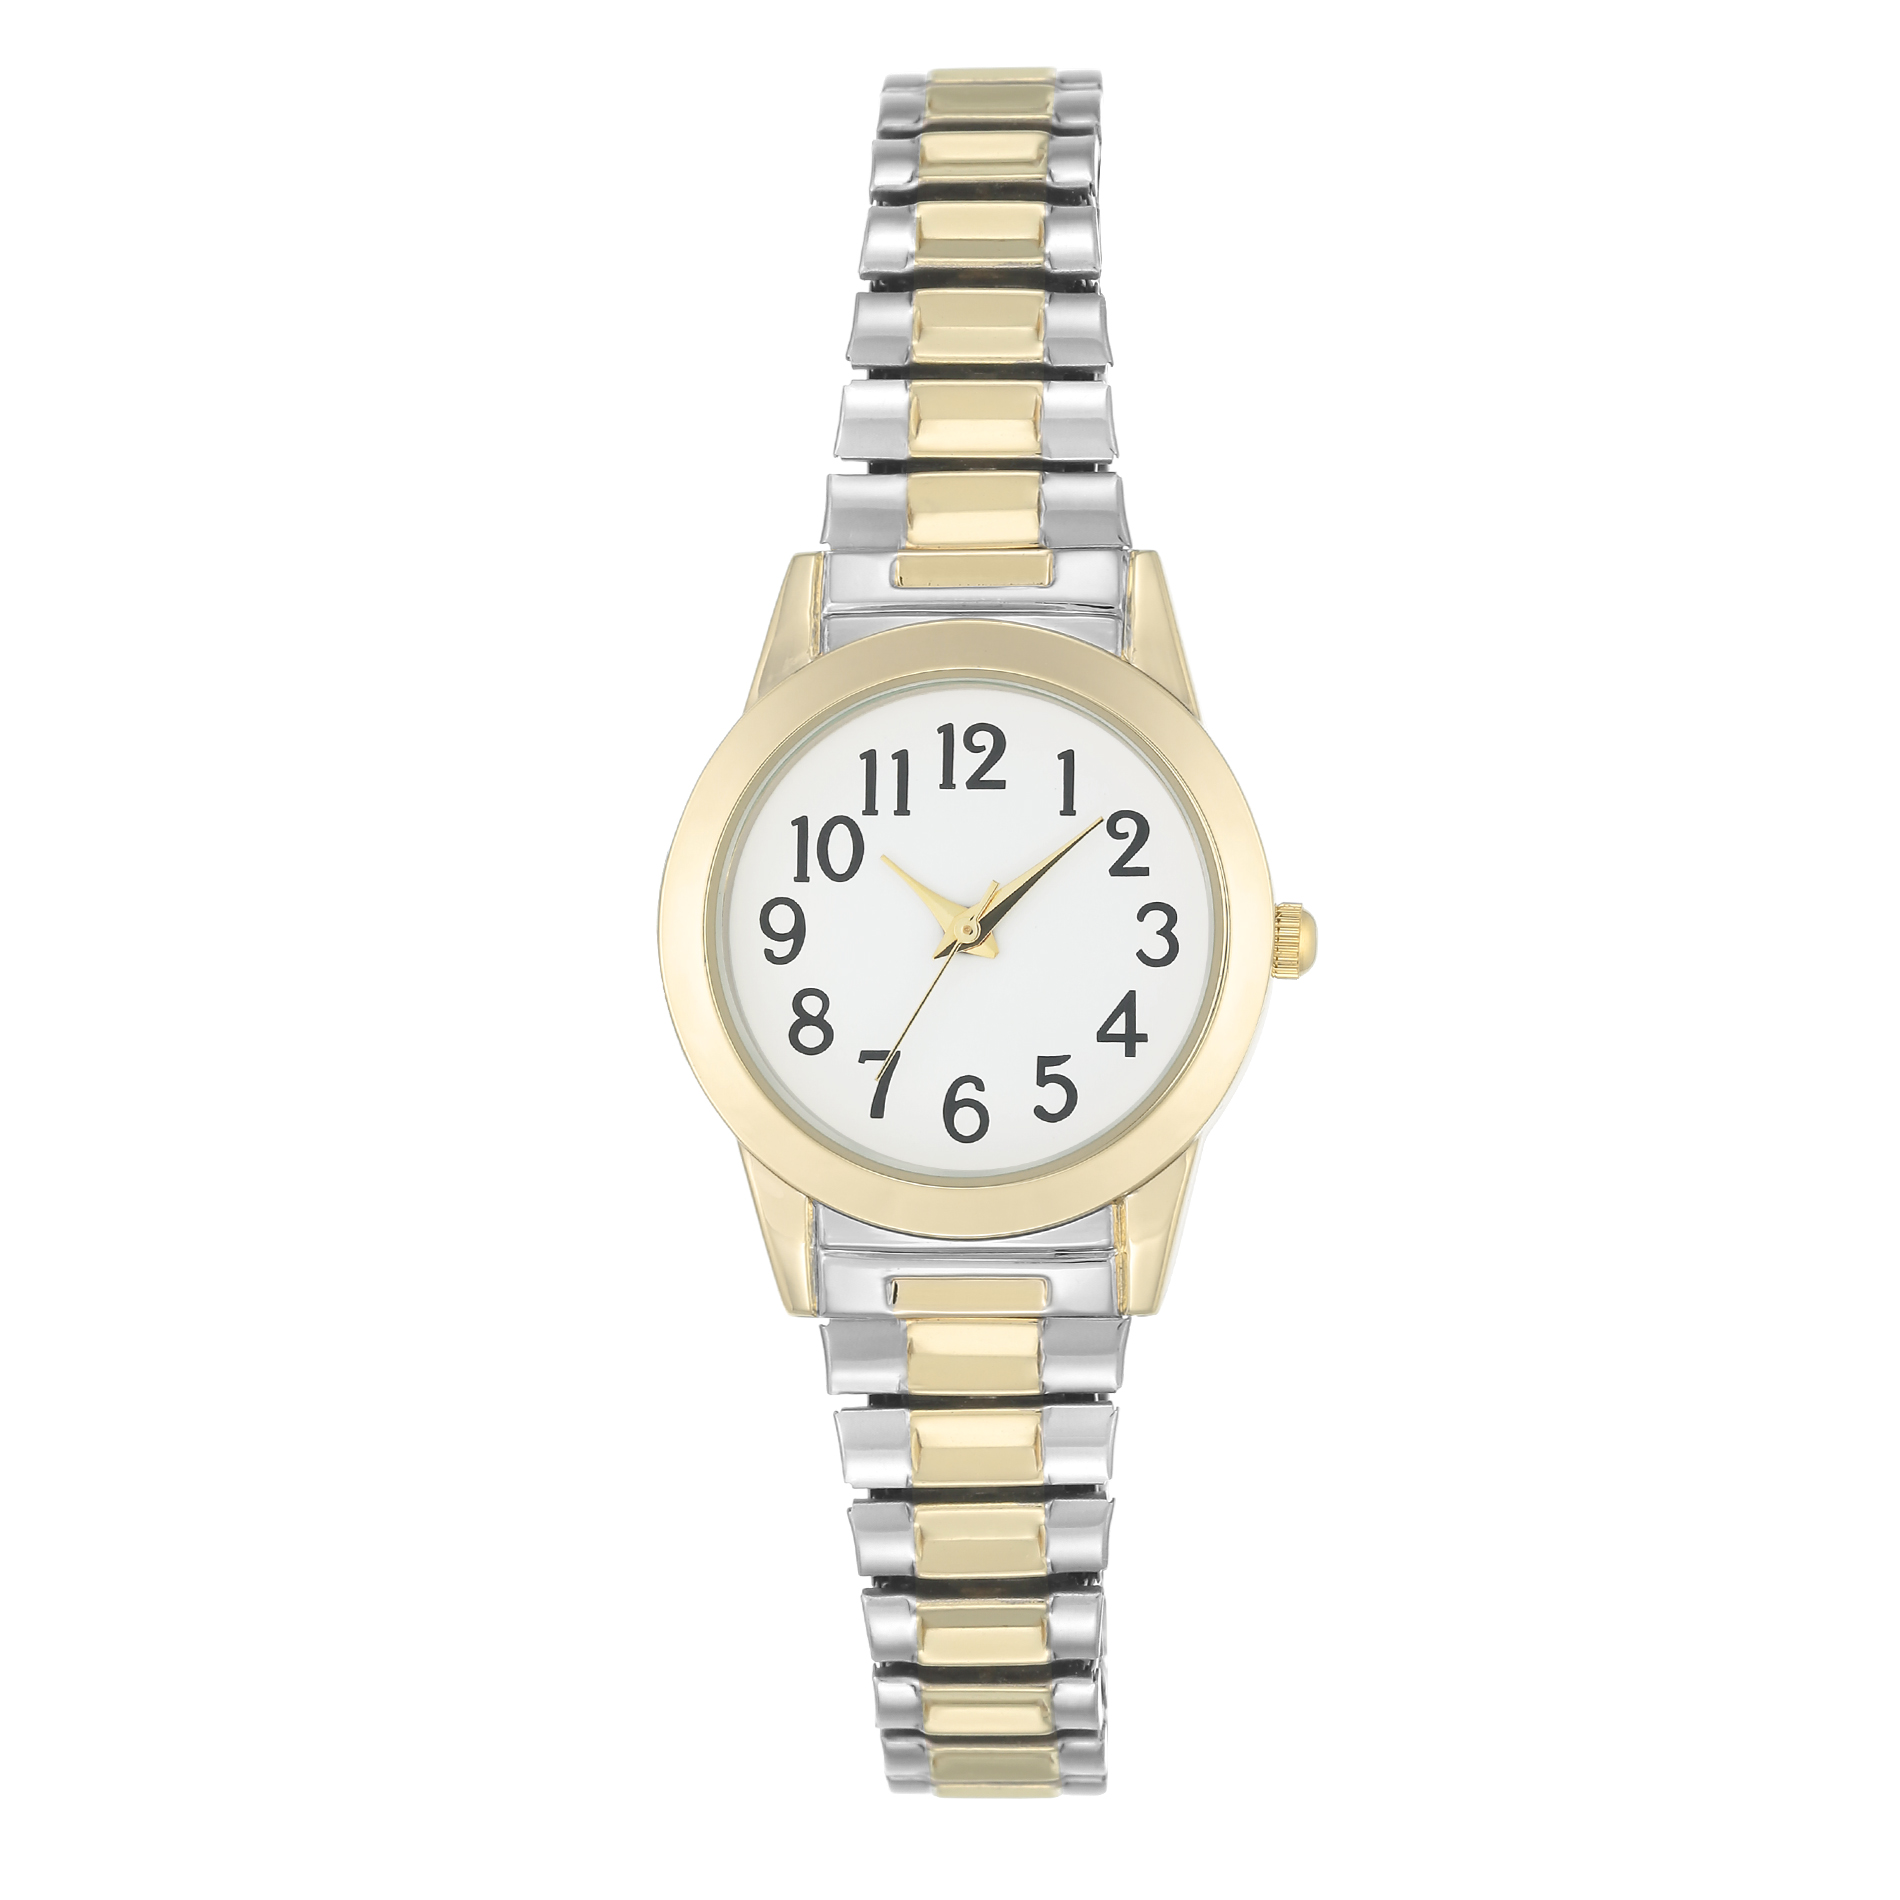 Two Tone Analog Expansion Watch